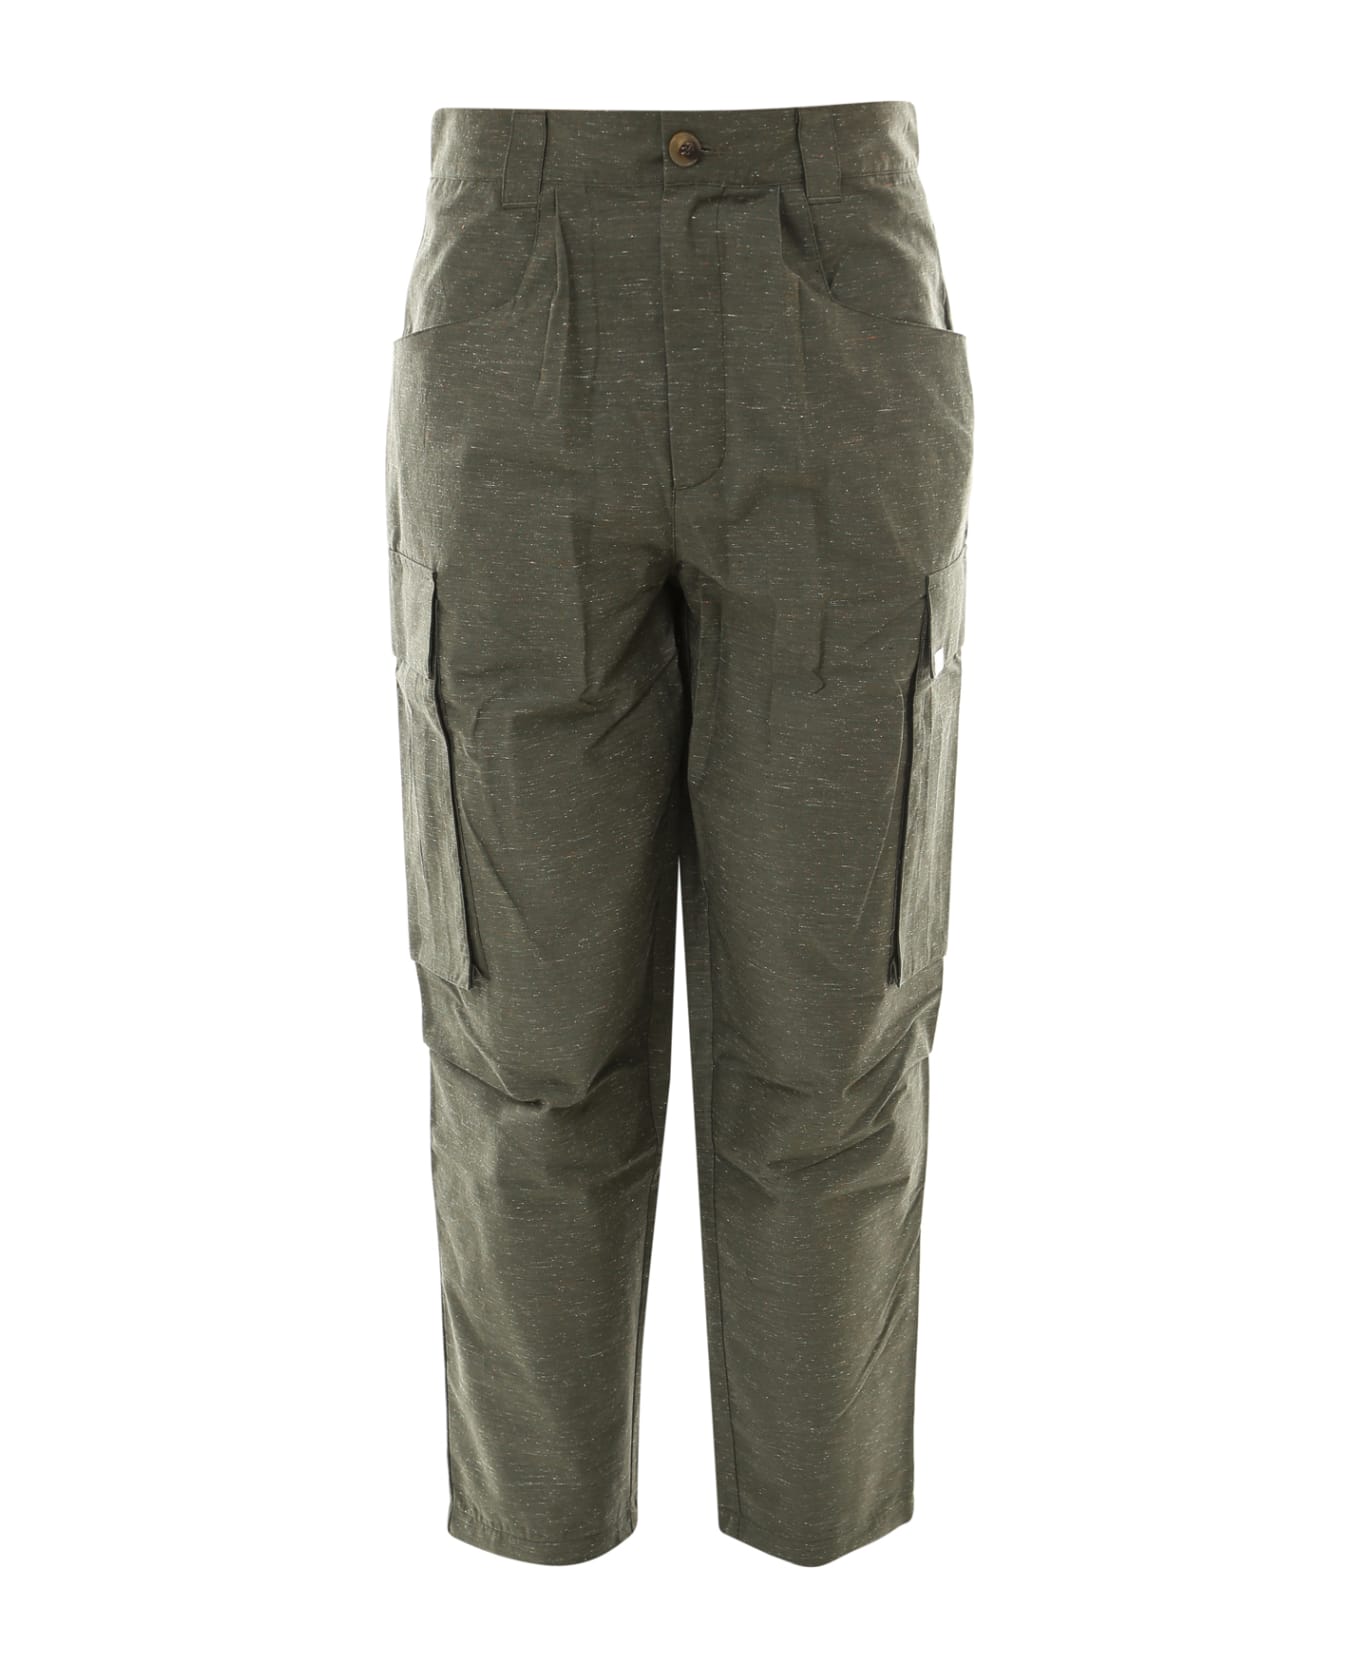 Silted Trouser - Green ボトムス